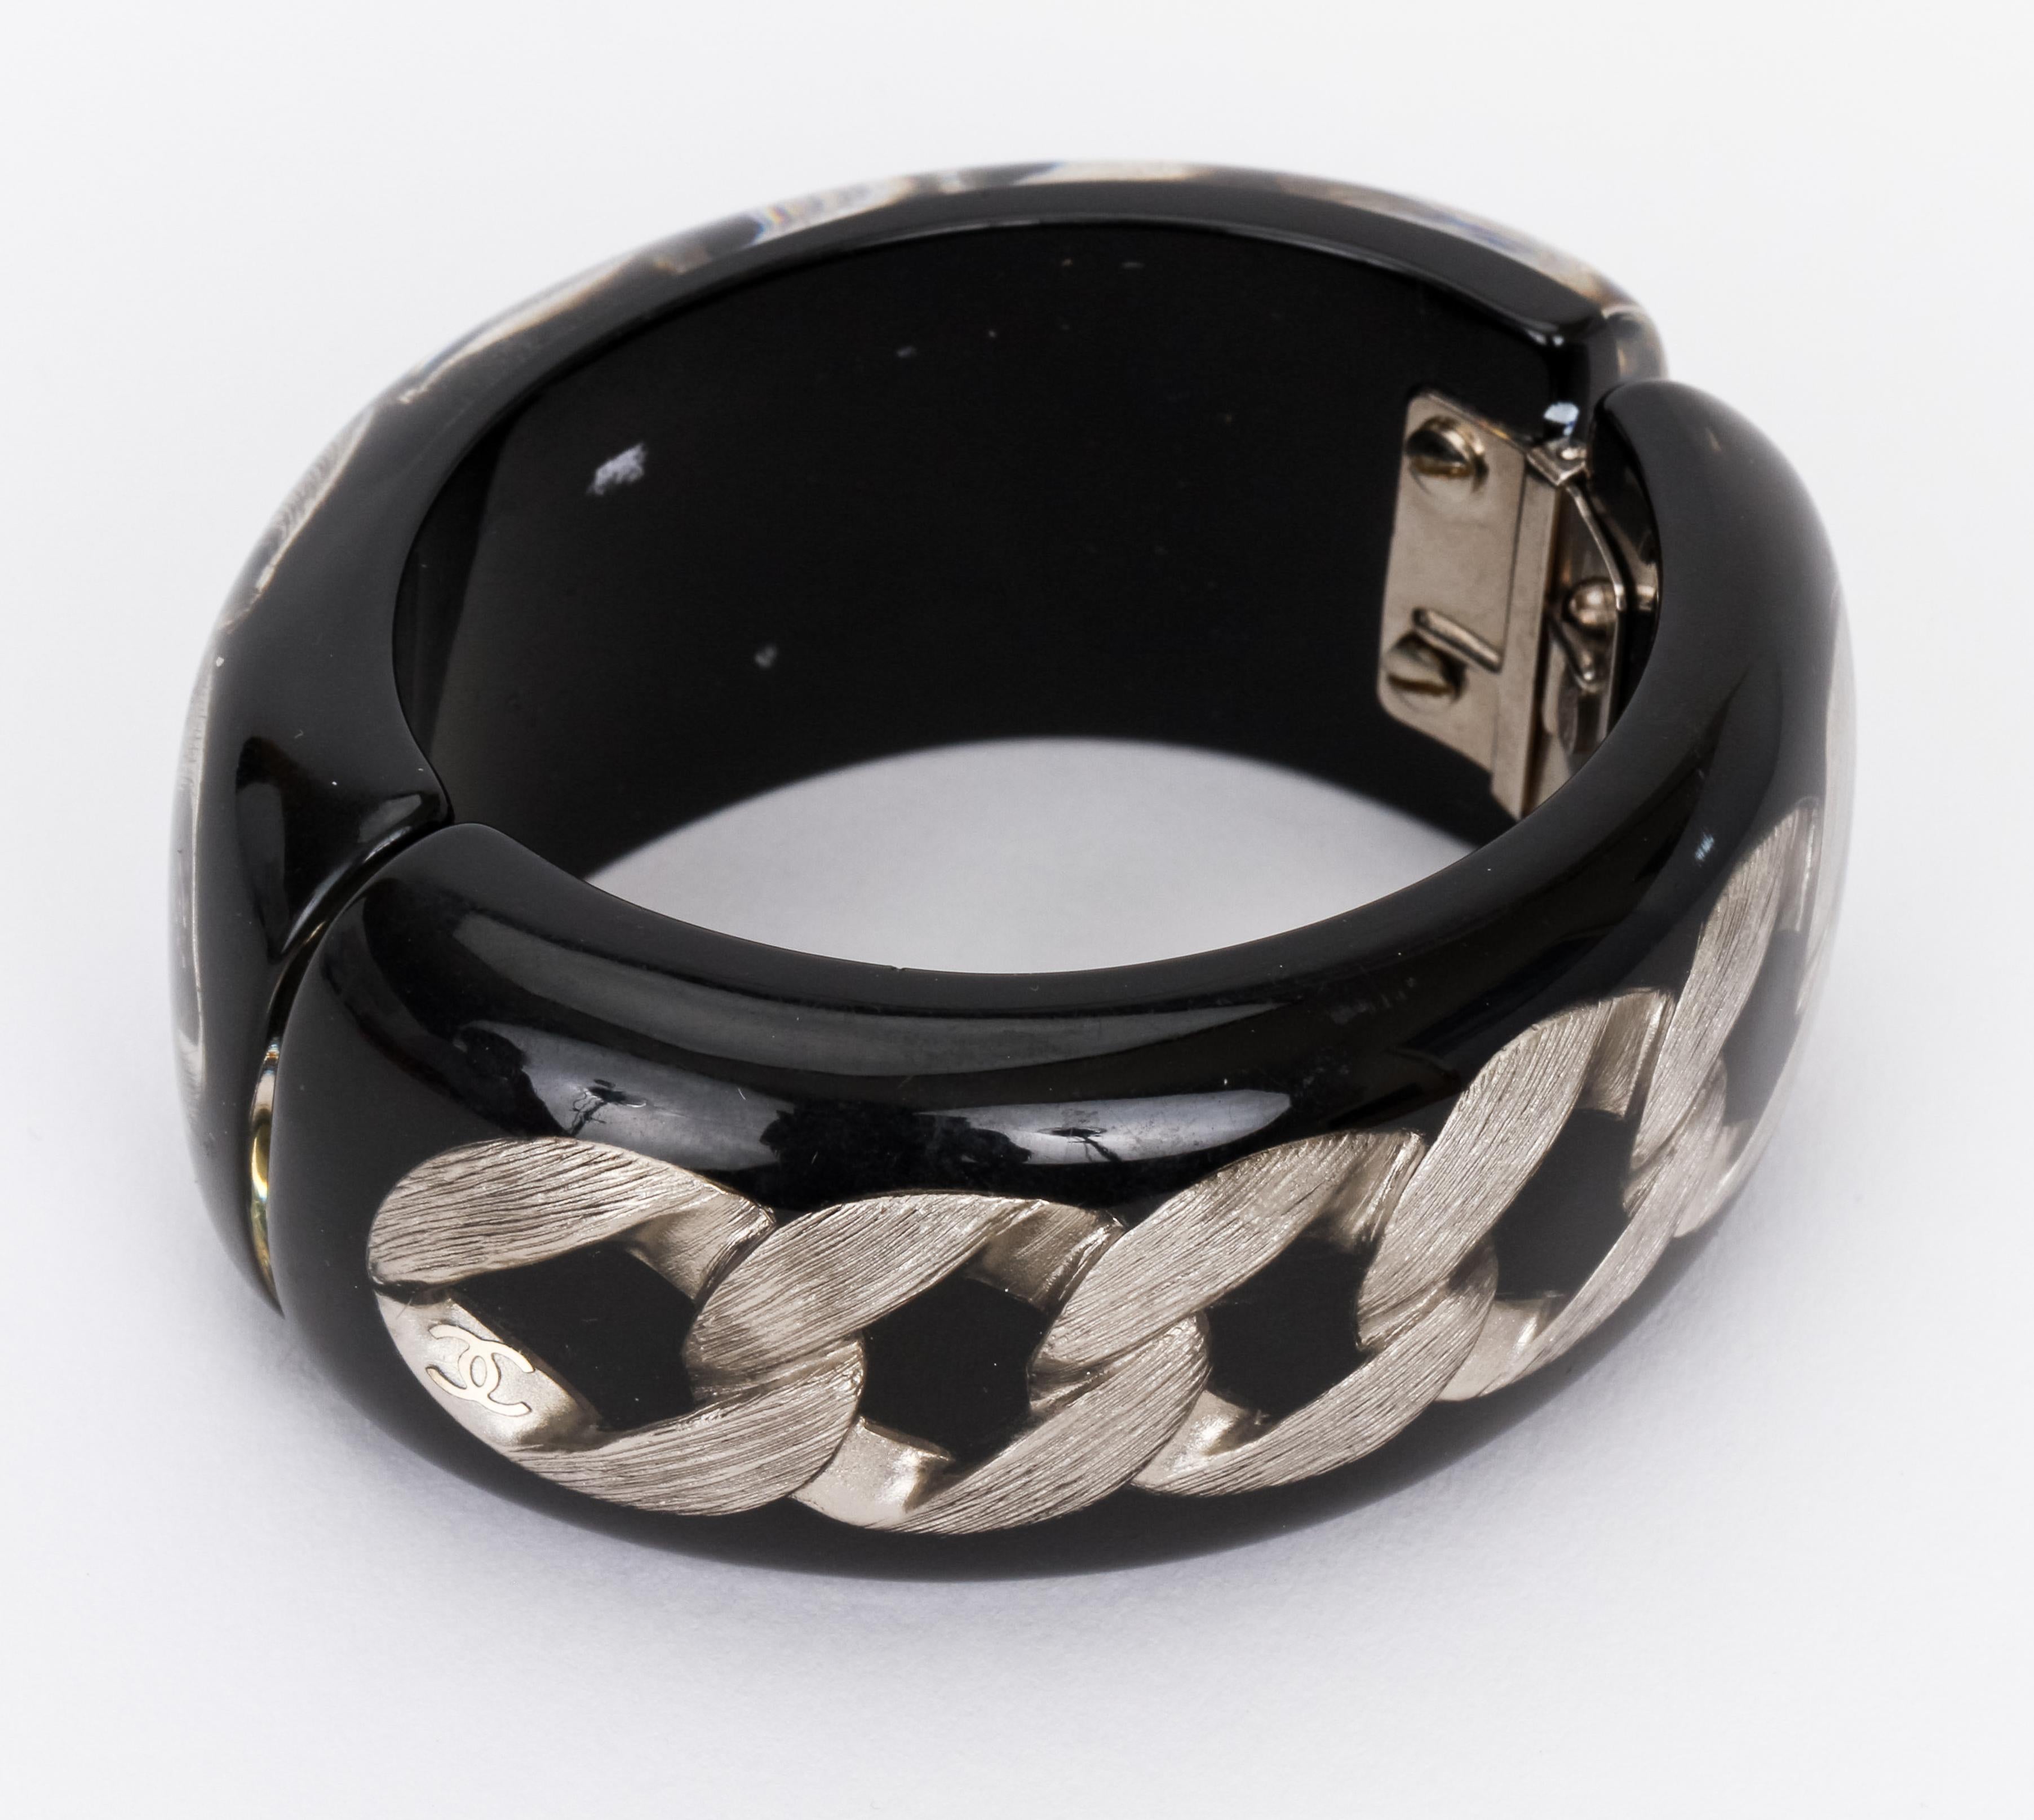 Chanel black lucite hinged oval cuff with ruthenium chain inlay, circumference 9.5”, original pouch